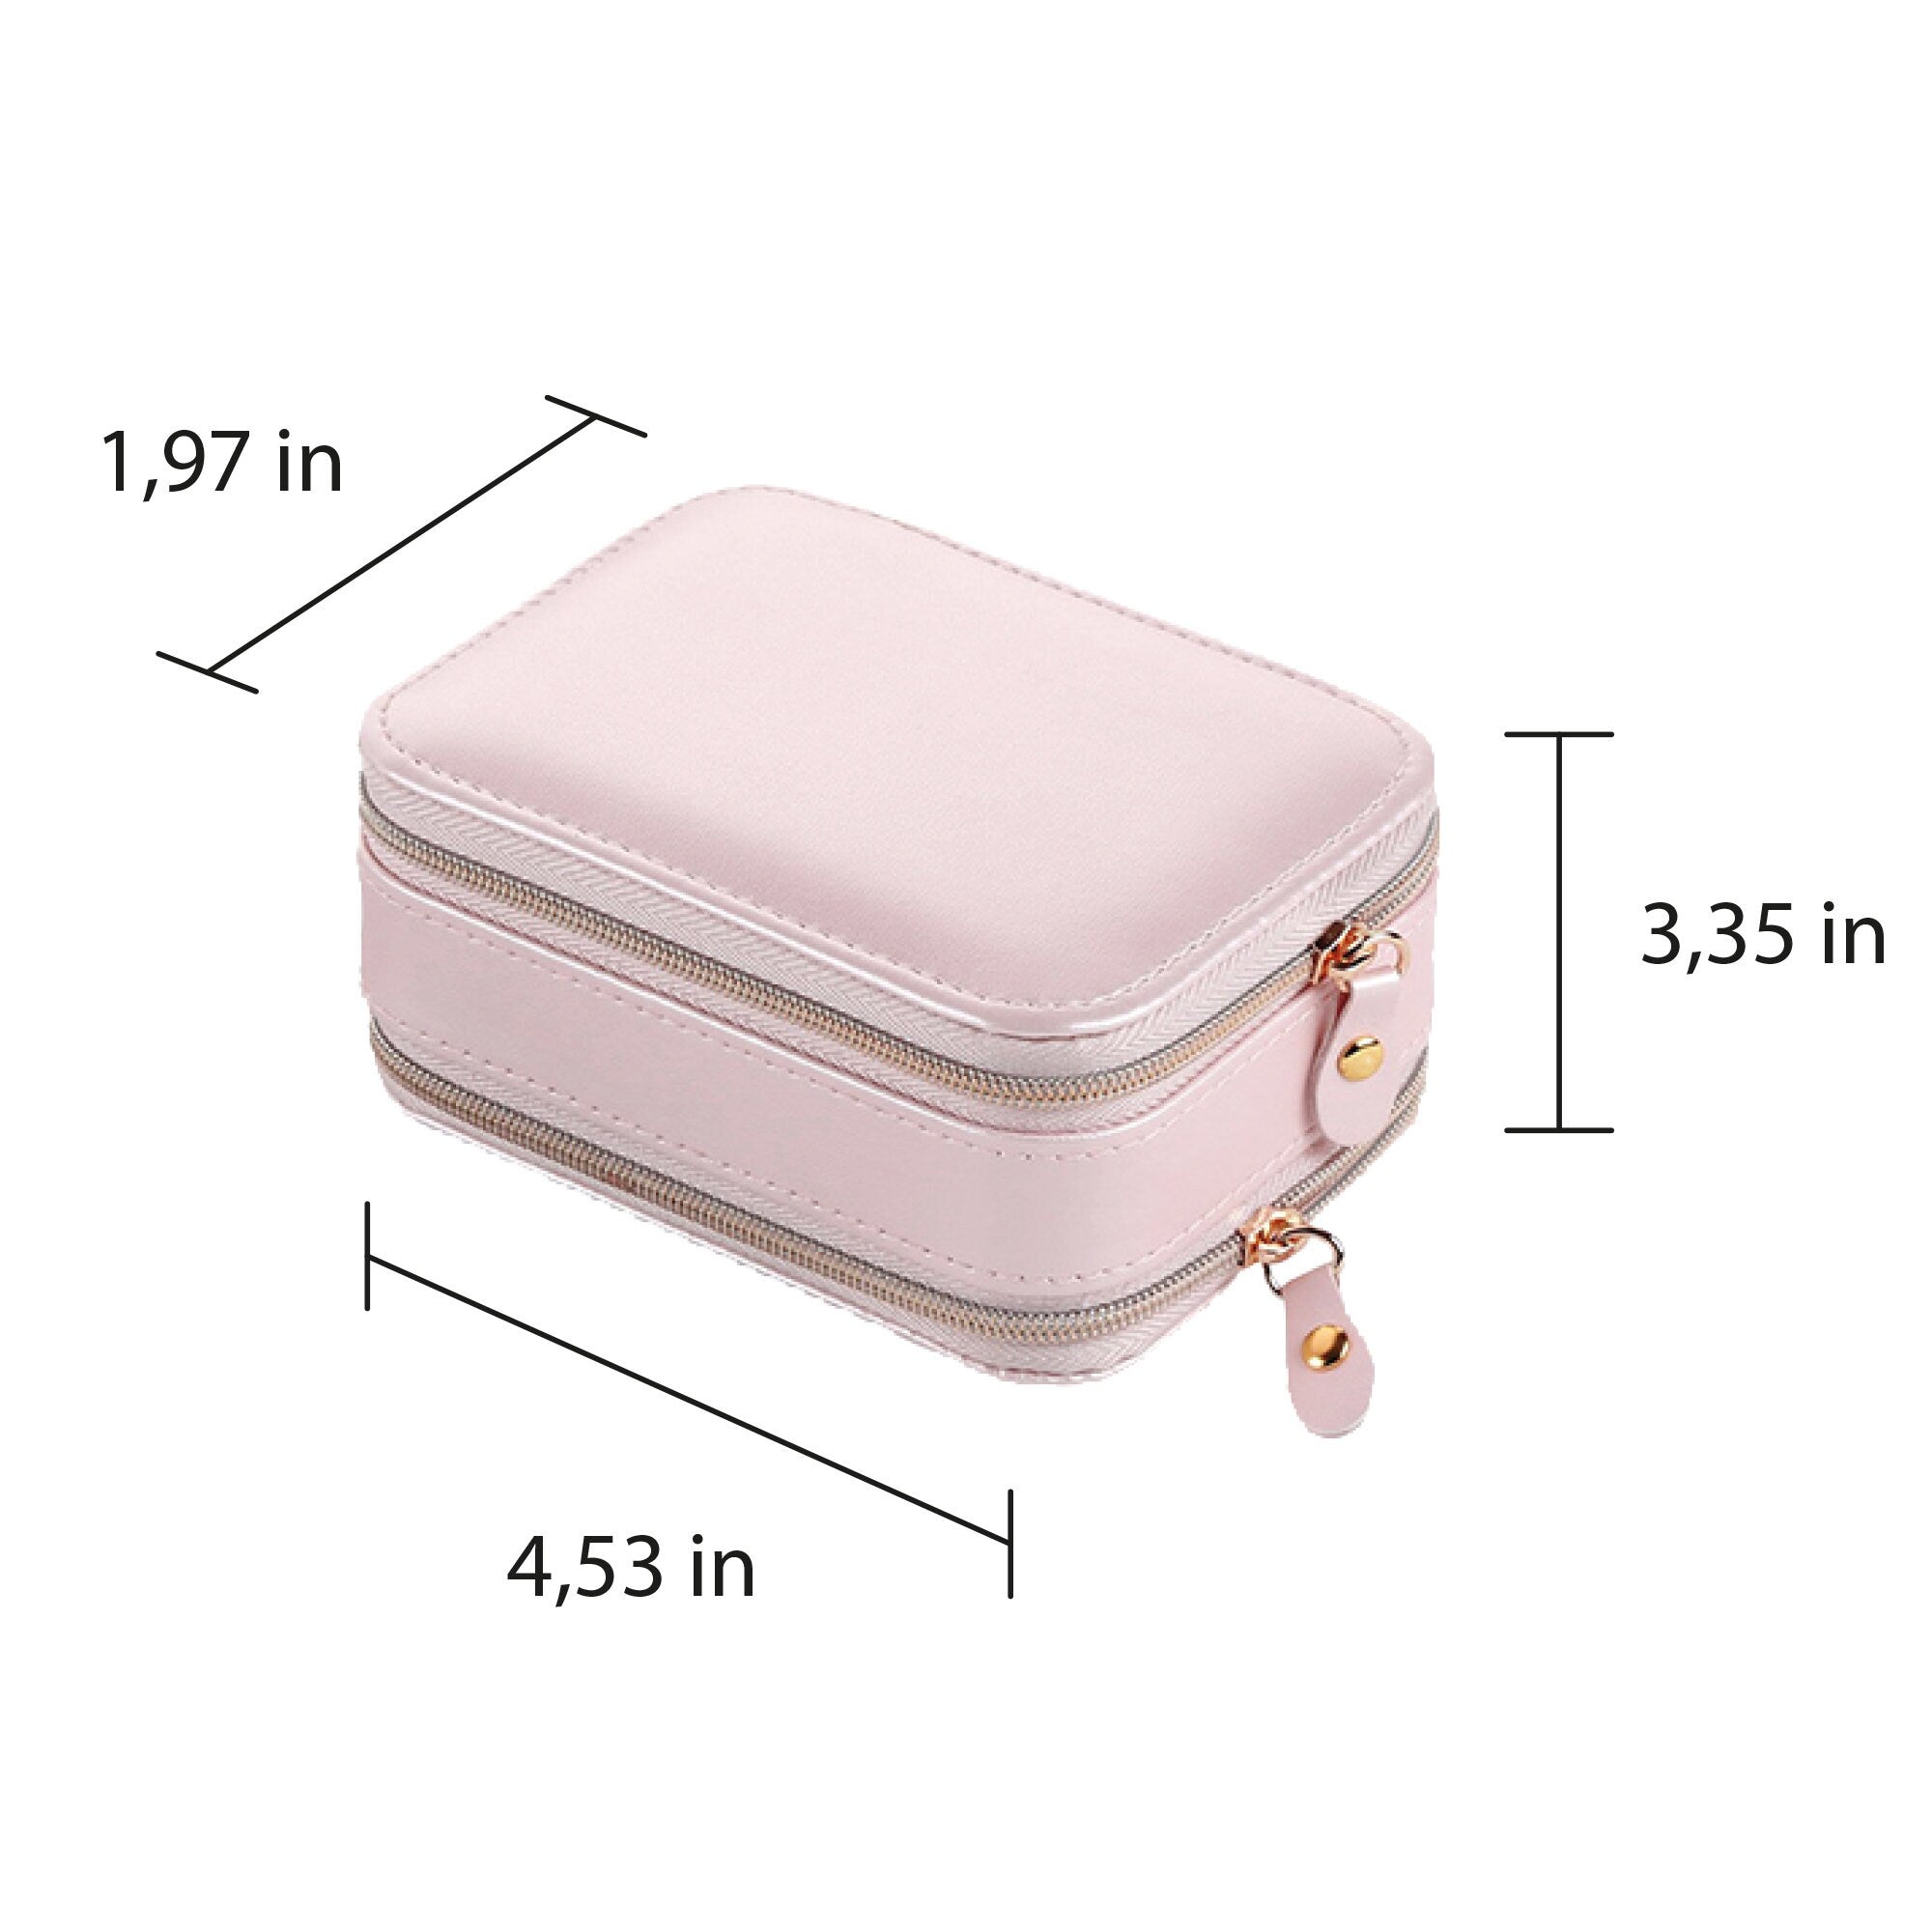 a small pink case with a zipper on the side